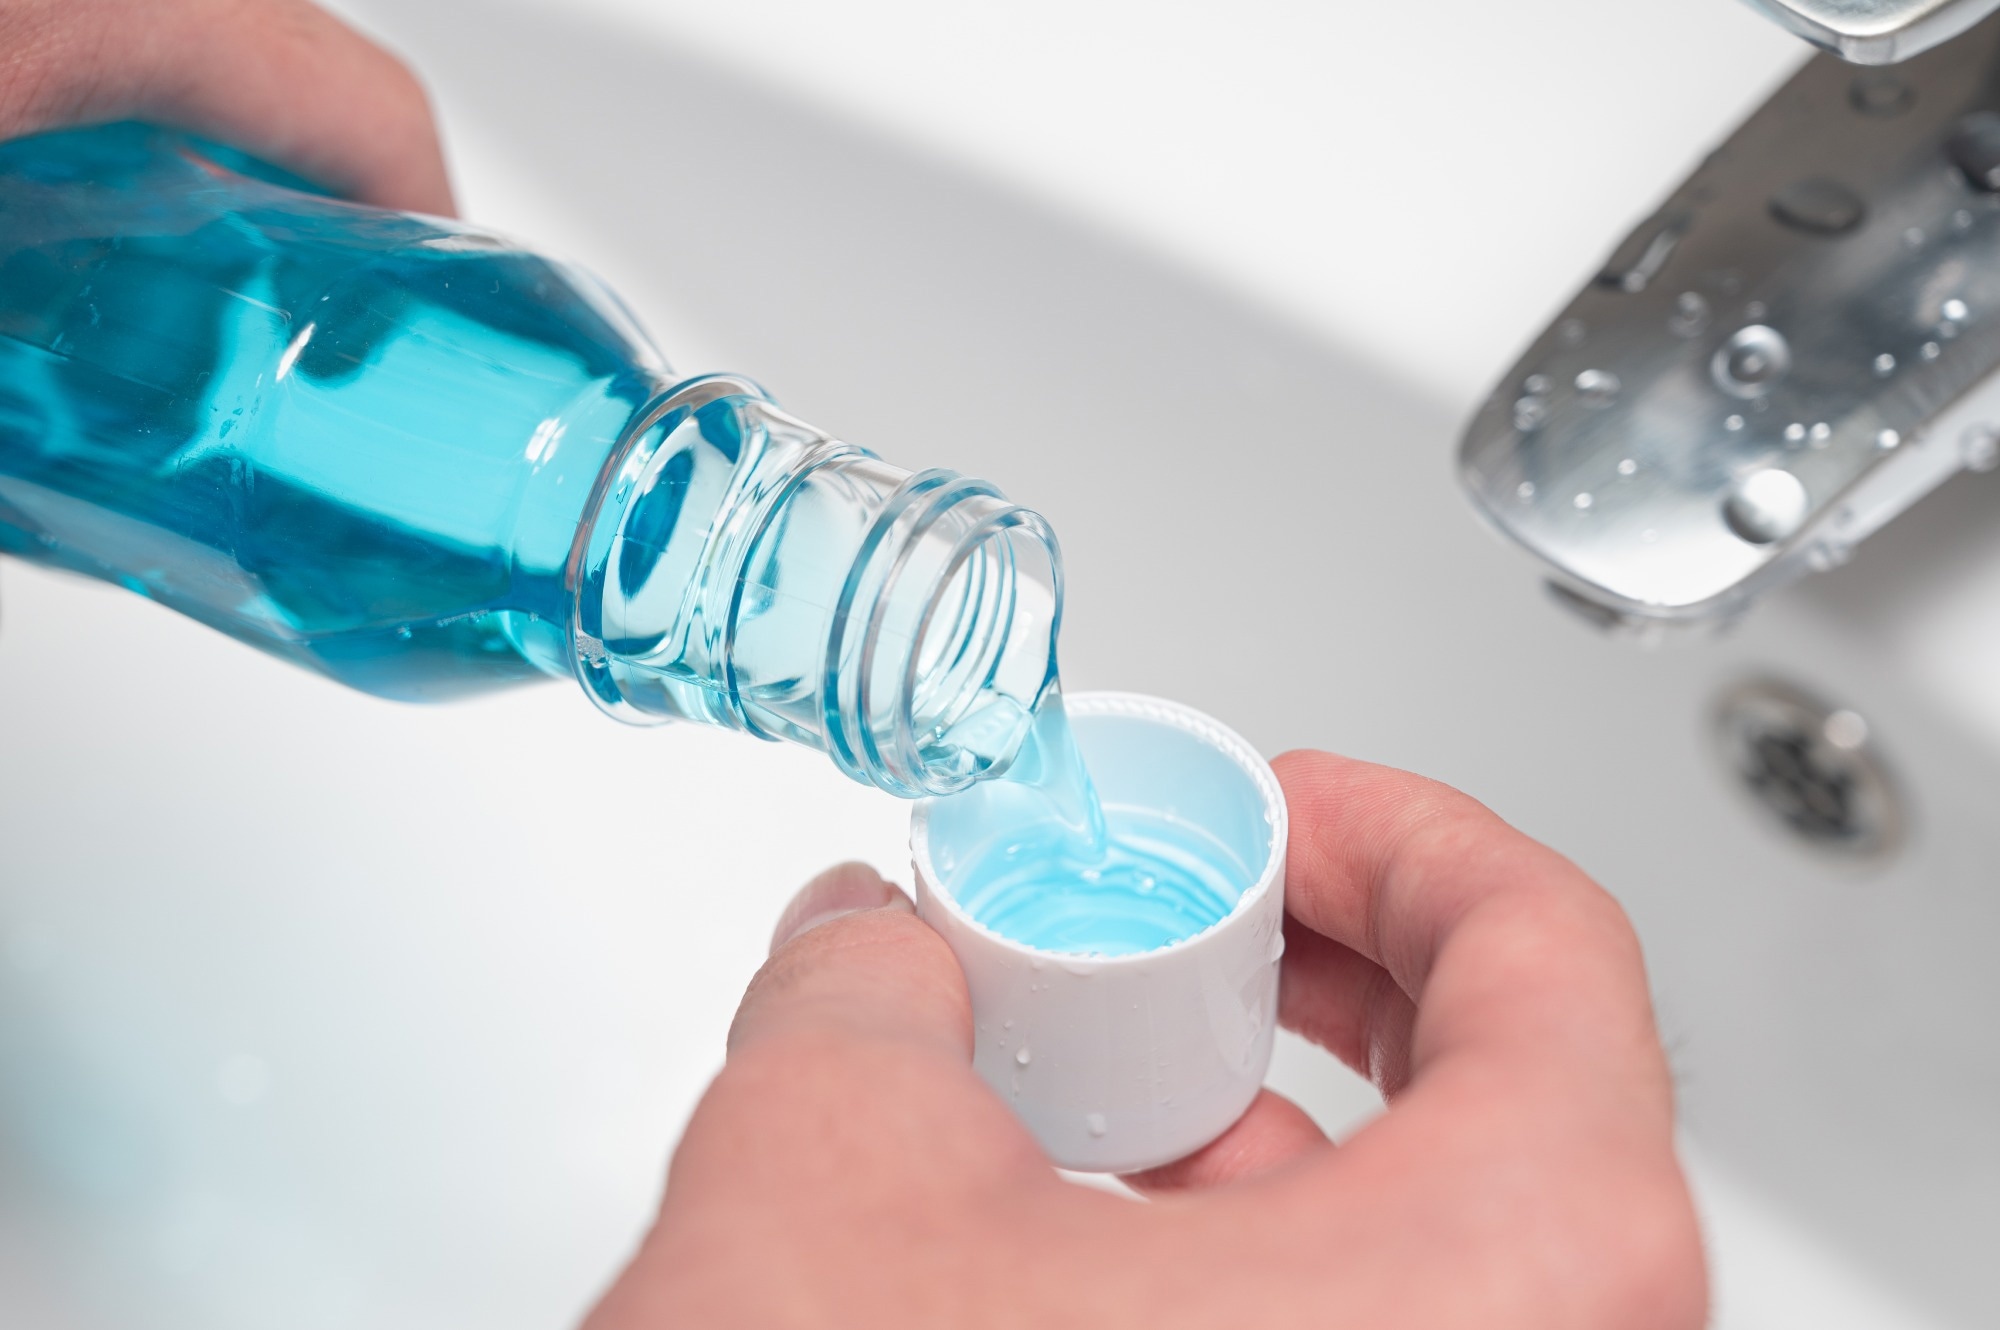 Study: Evaluation of alcohol-free mouthwash for studies of the oral microbiome. Image Credit: JuJae-young/Shutterstock.com